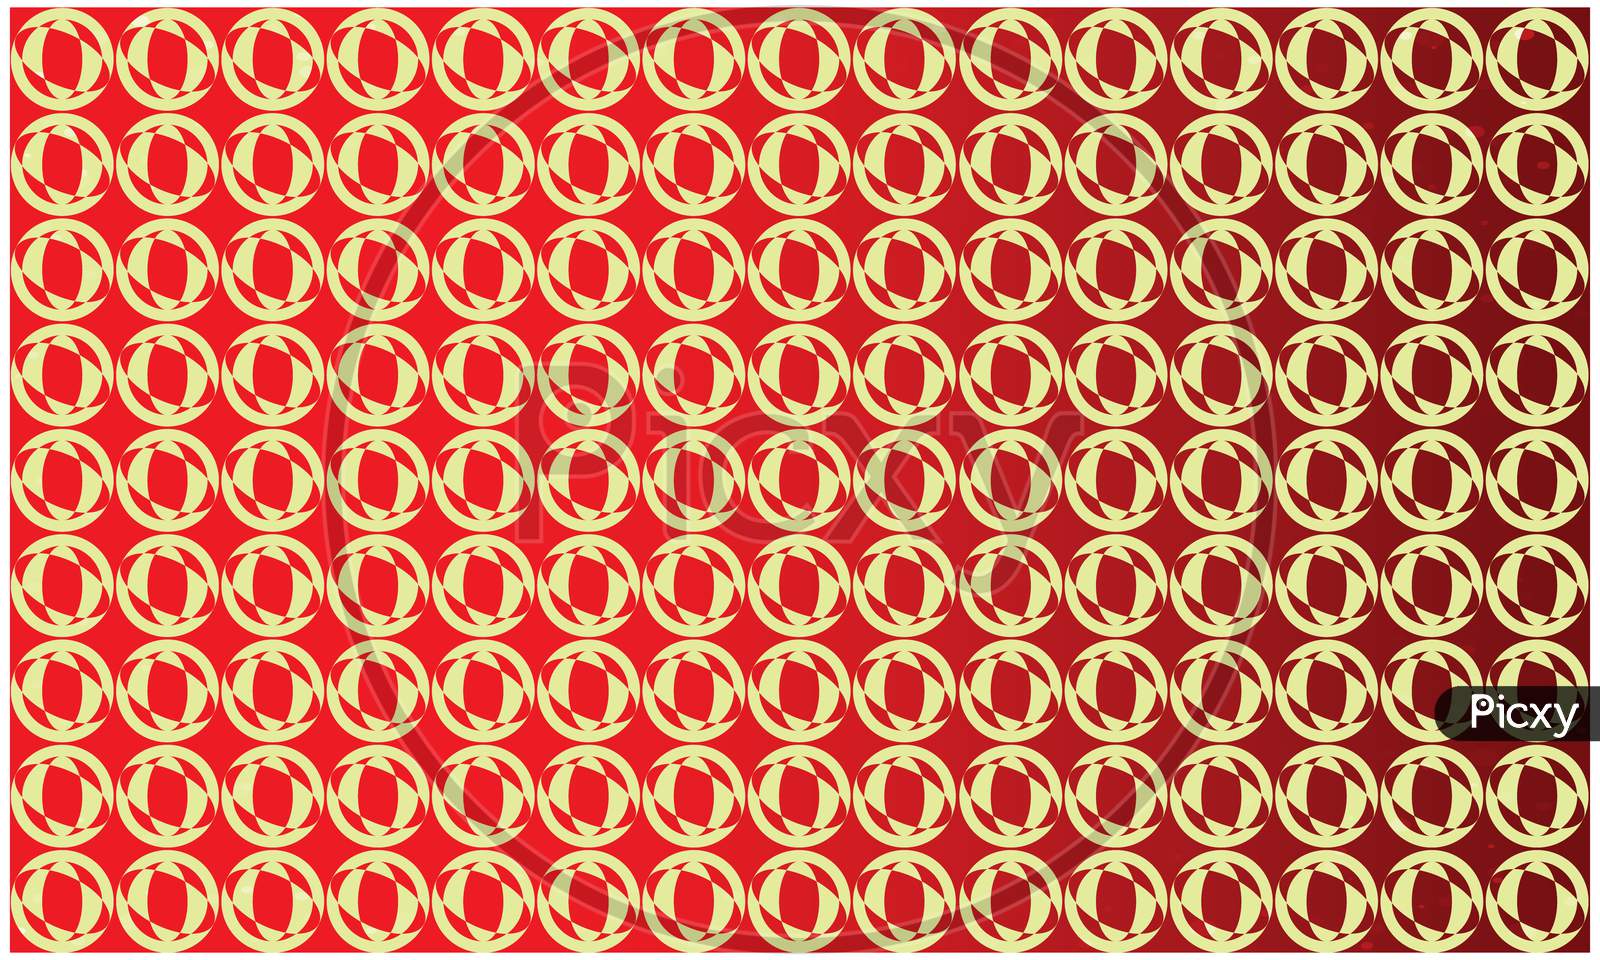 Circles And Ovals On Abstract Red Background